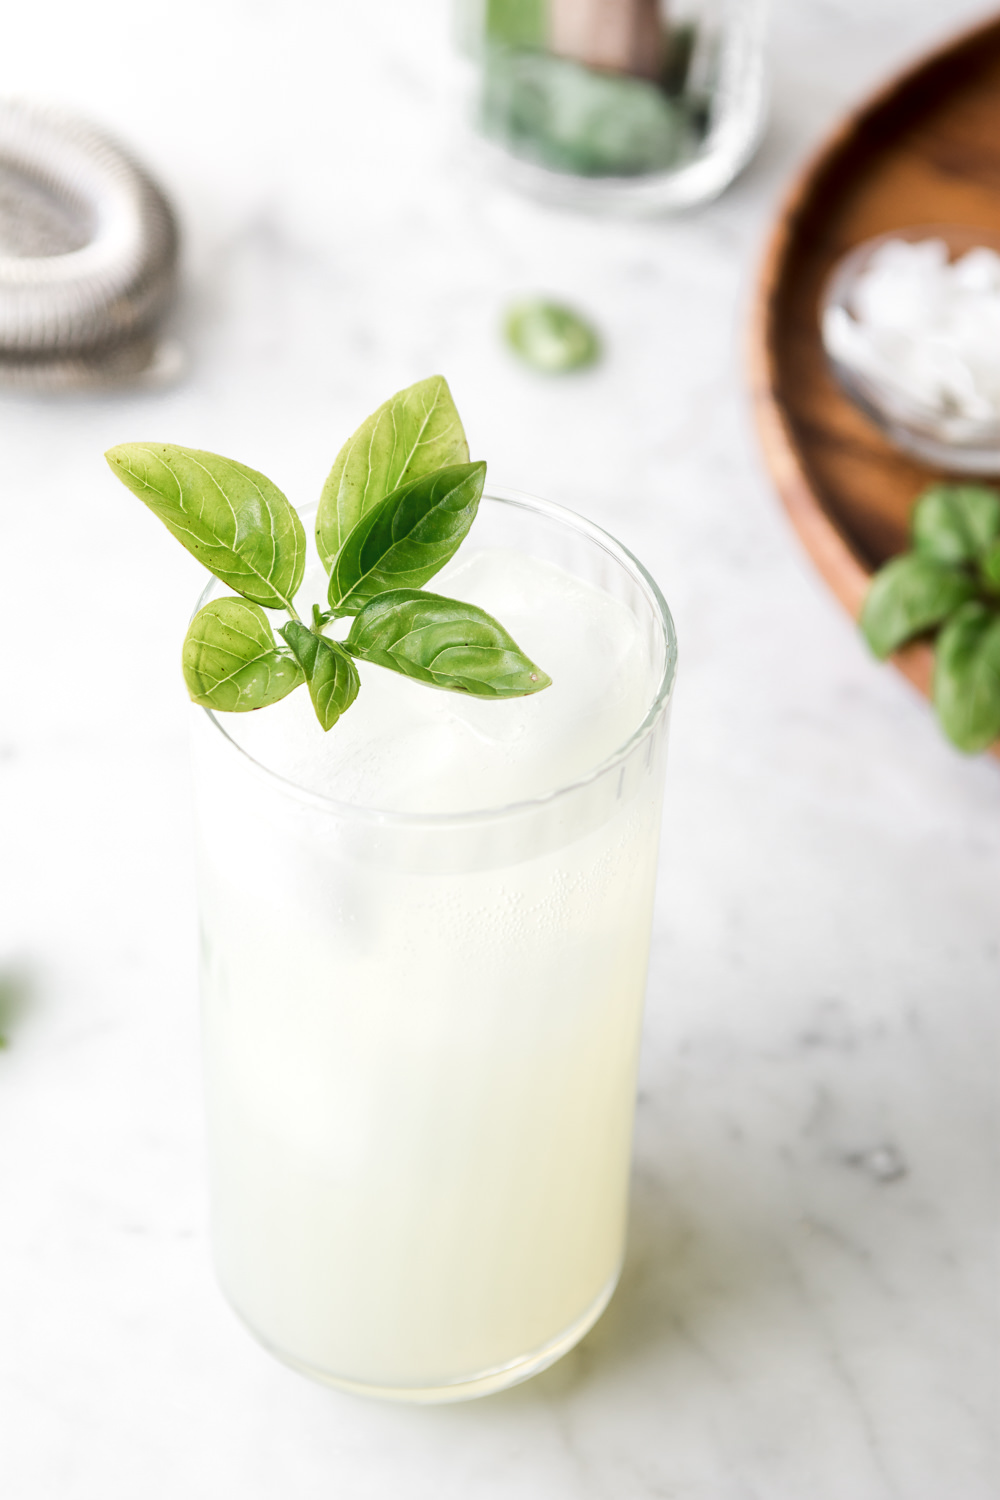 https://www.withspice.com/wp-content/uploads/2020/04/basil-coconut-mojito.jpg